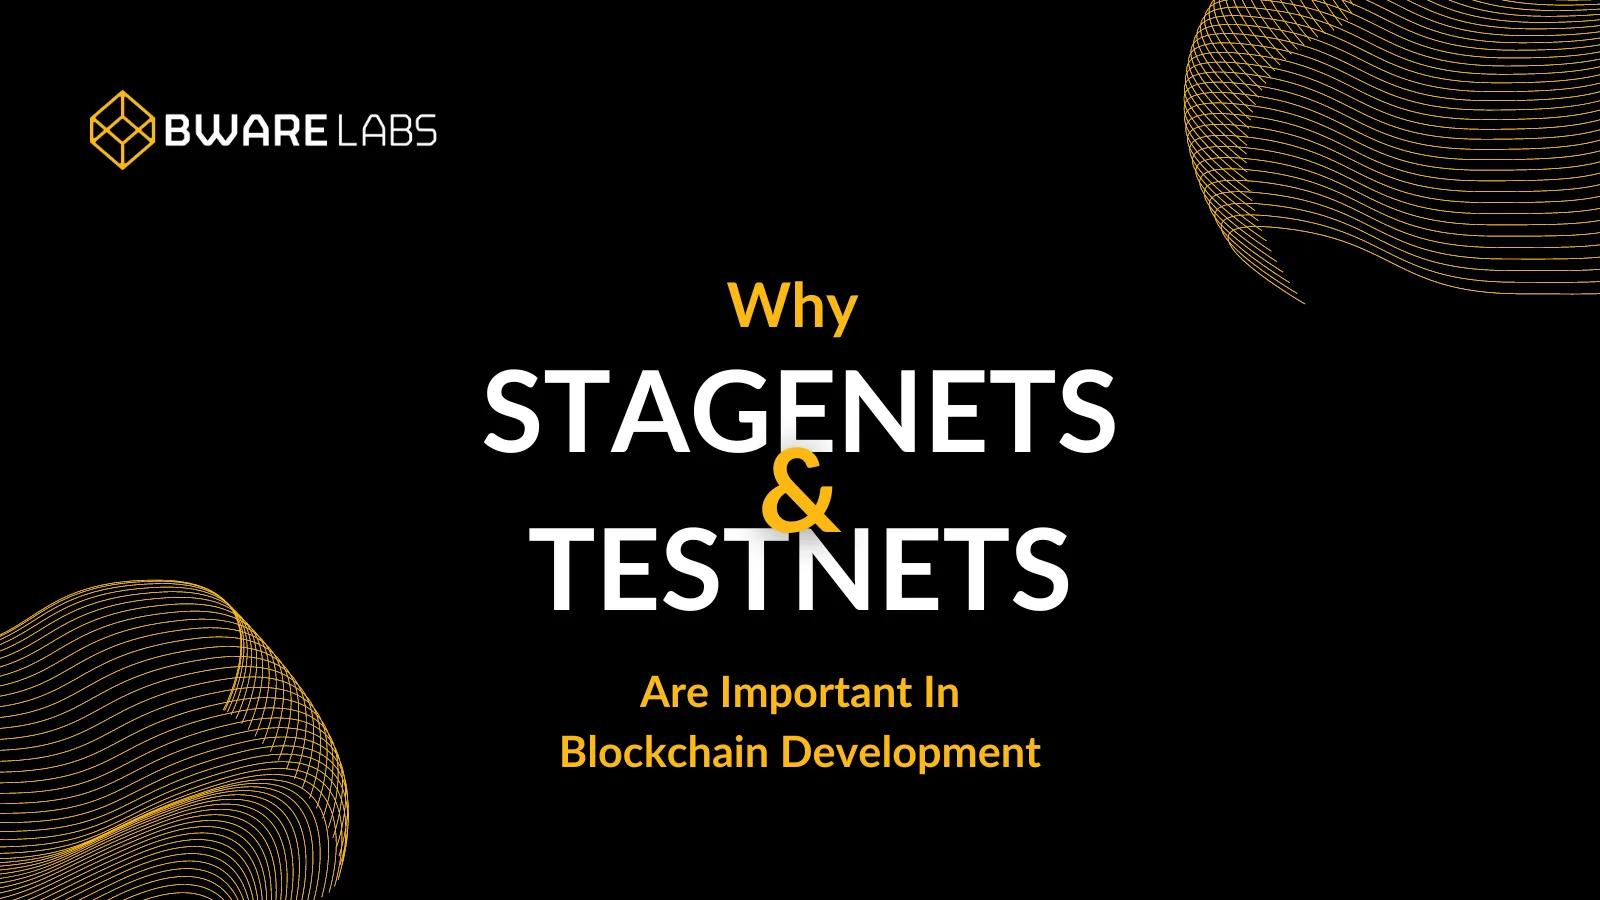 Why Are Testnets and Stagenets Important for Blockchain Development